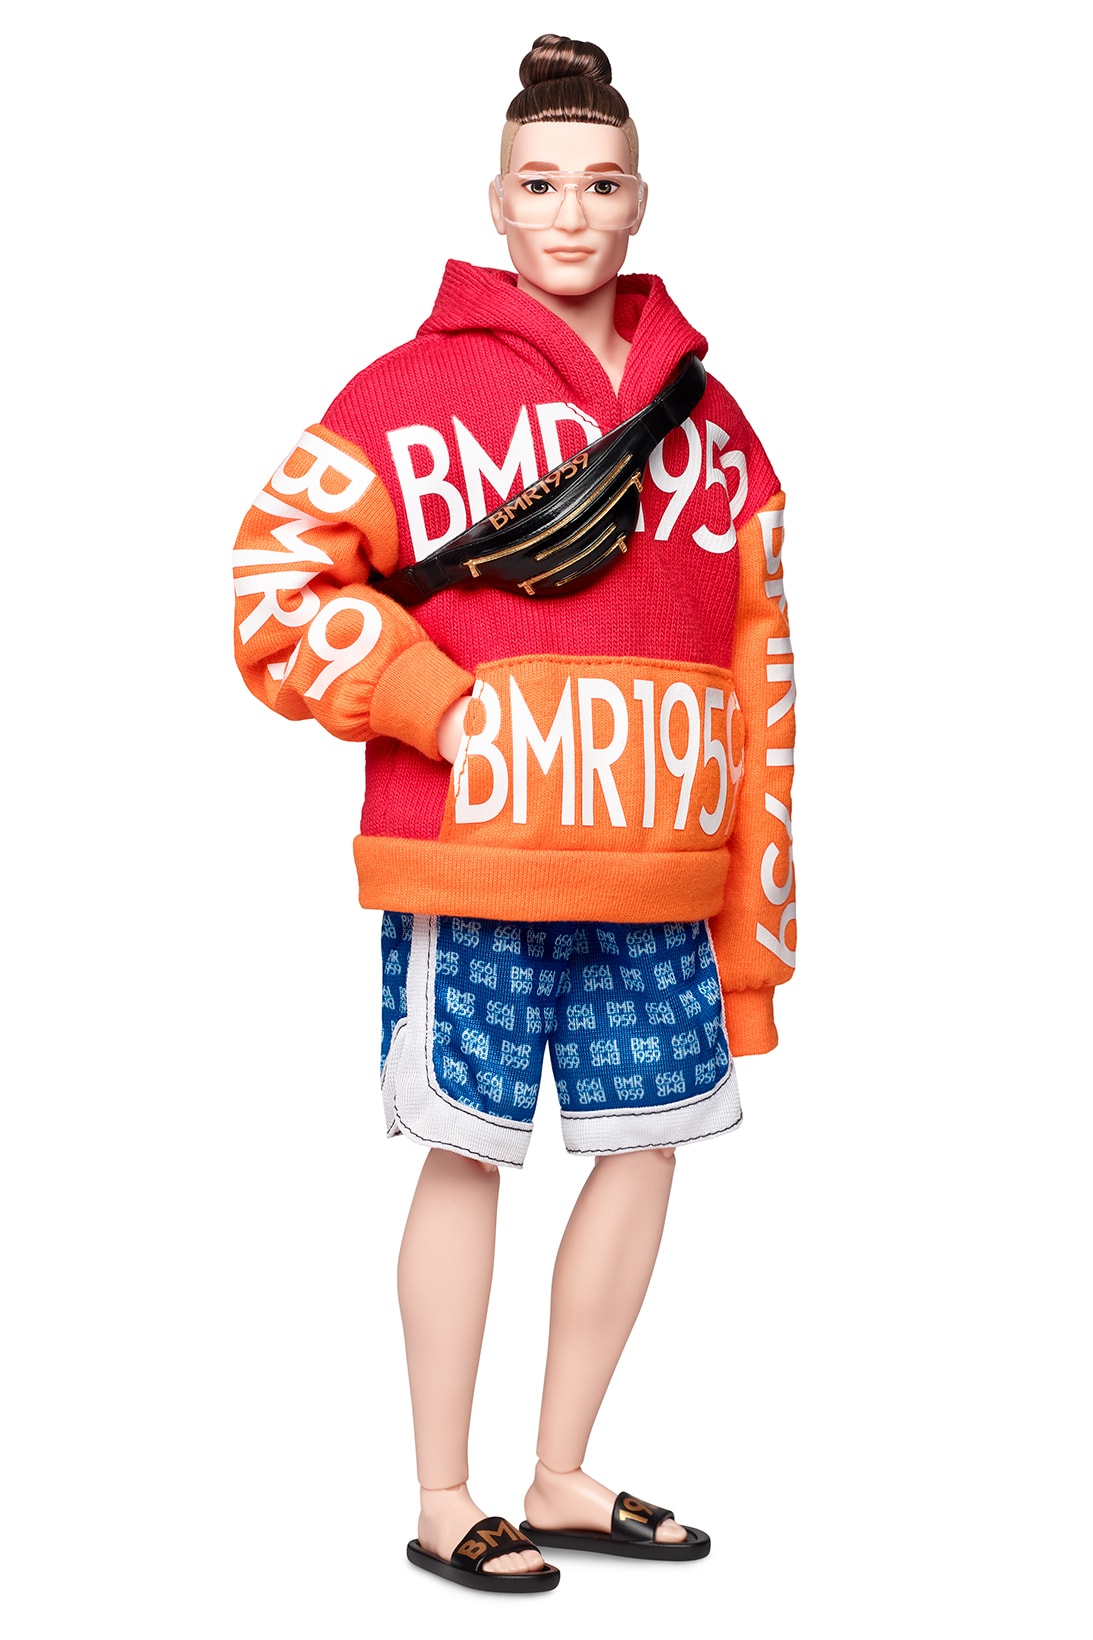 barbie bmr1959 streetwear collection hoodies denim jackets overalls bike shorts fanny pack shades shoes heels sneakers cap hat dolls